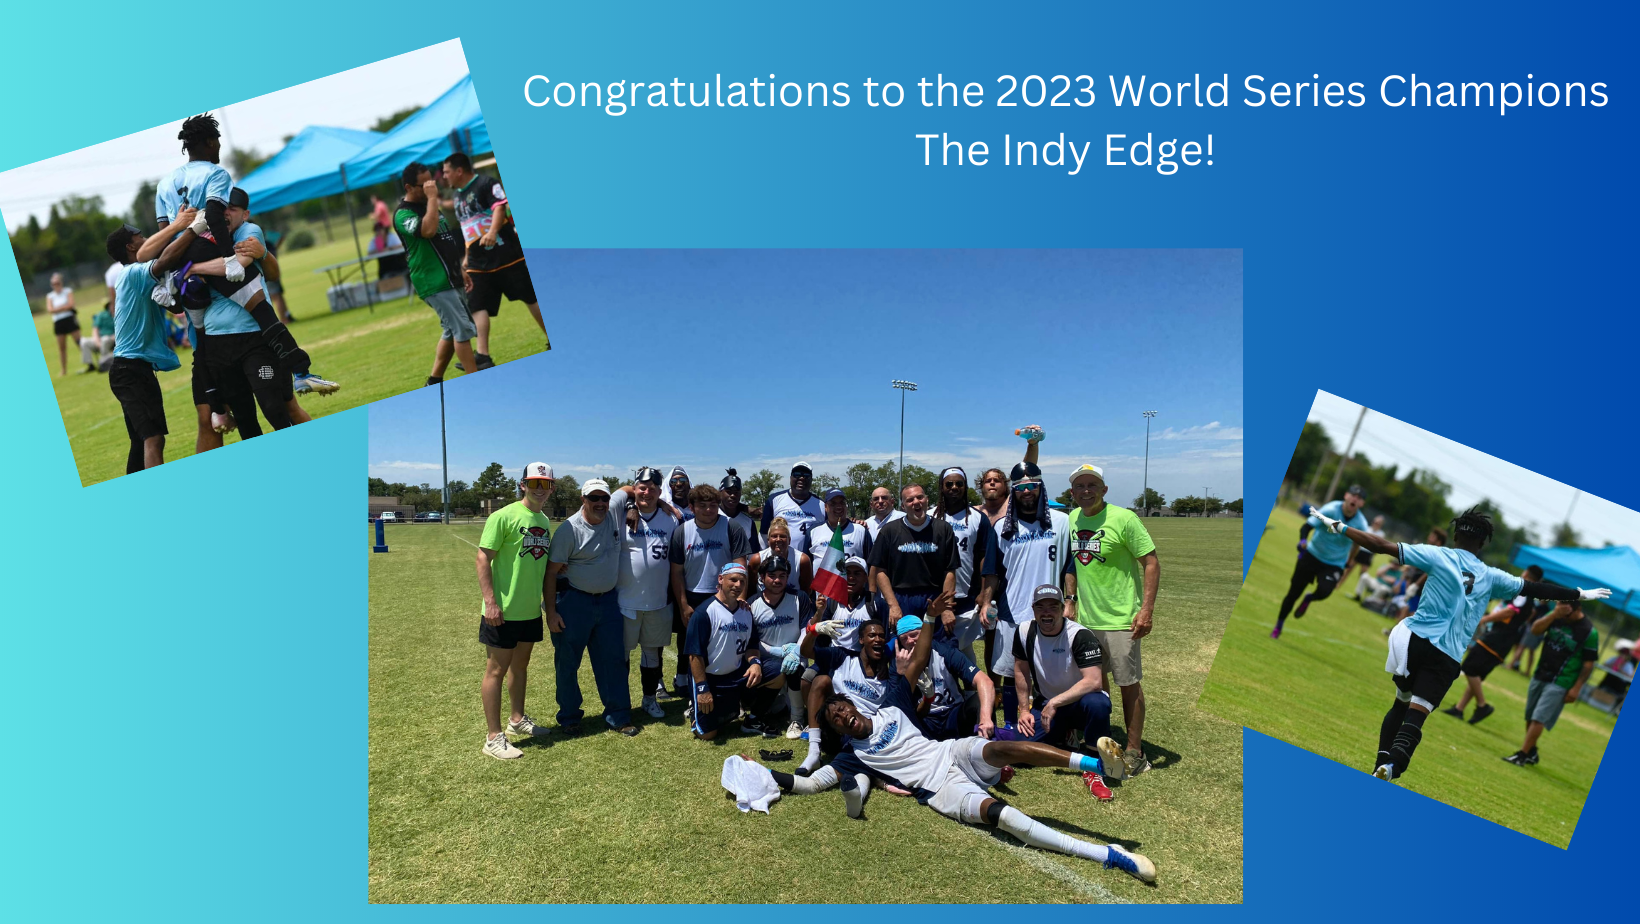 Collage of 3 photos - team photo in center, 2 celebrating after the last run was scored.  It say sat the top "Congratulations to the 2023 World Series Champions The Indy Edge